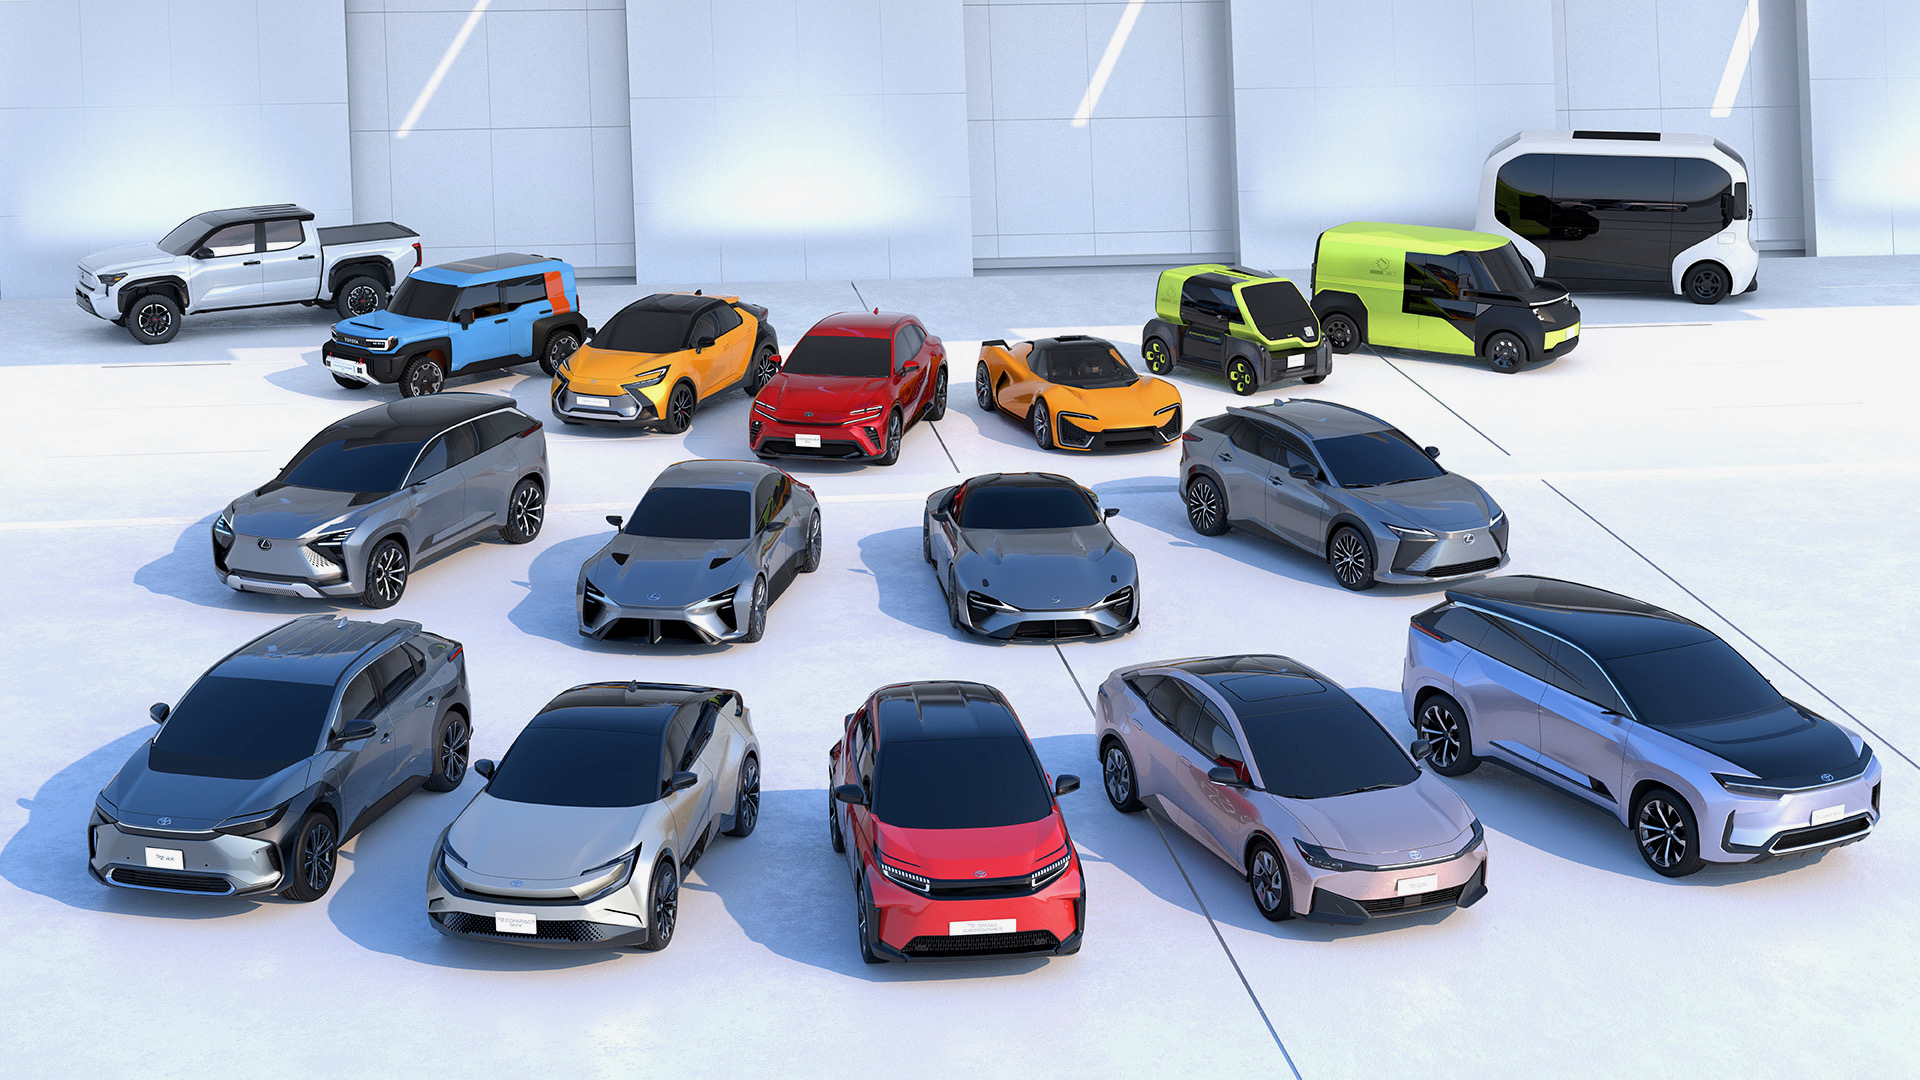 Toyota outlines $98b investment in EVs, debuts concepts; new MR2, Lexus LFA?